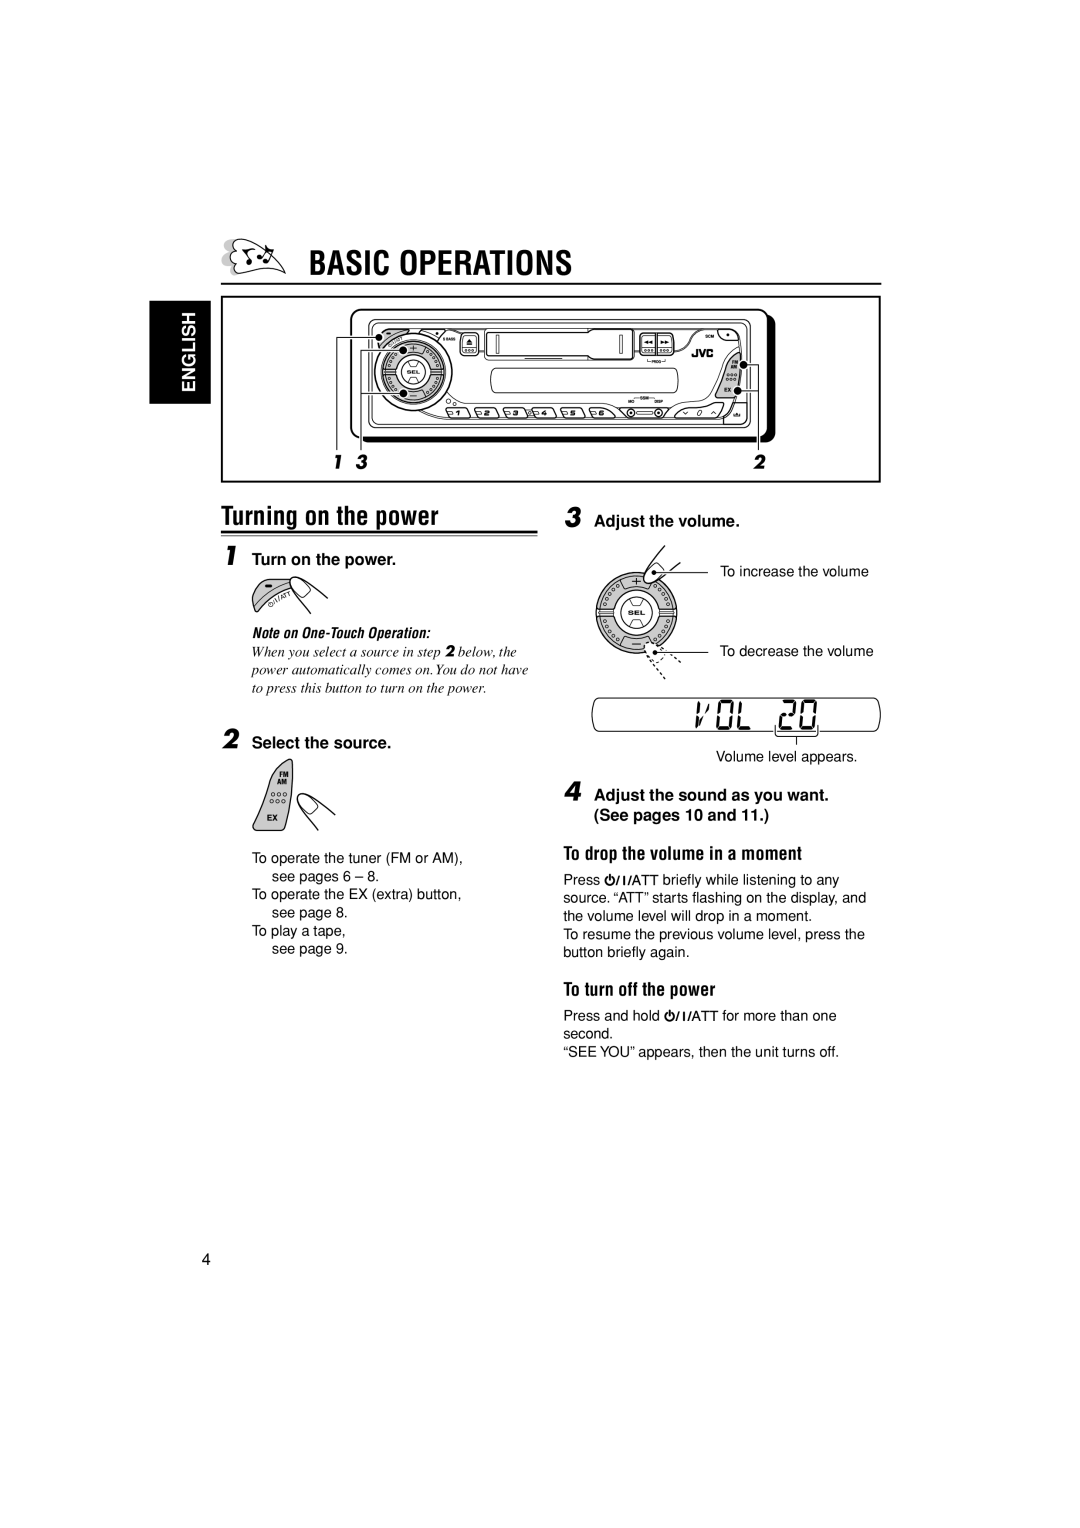 JVC KS-F185 manual Basic Operations, Turning on the power, English, To drop the volume in a moment, To turn off the power 